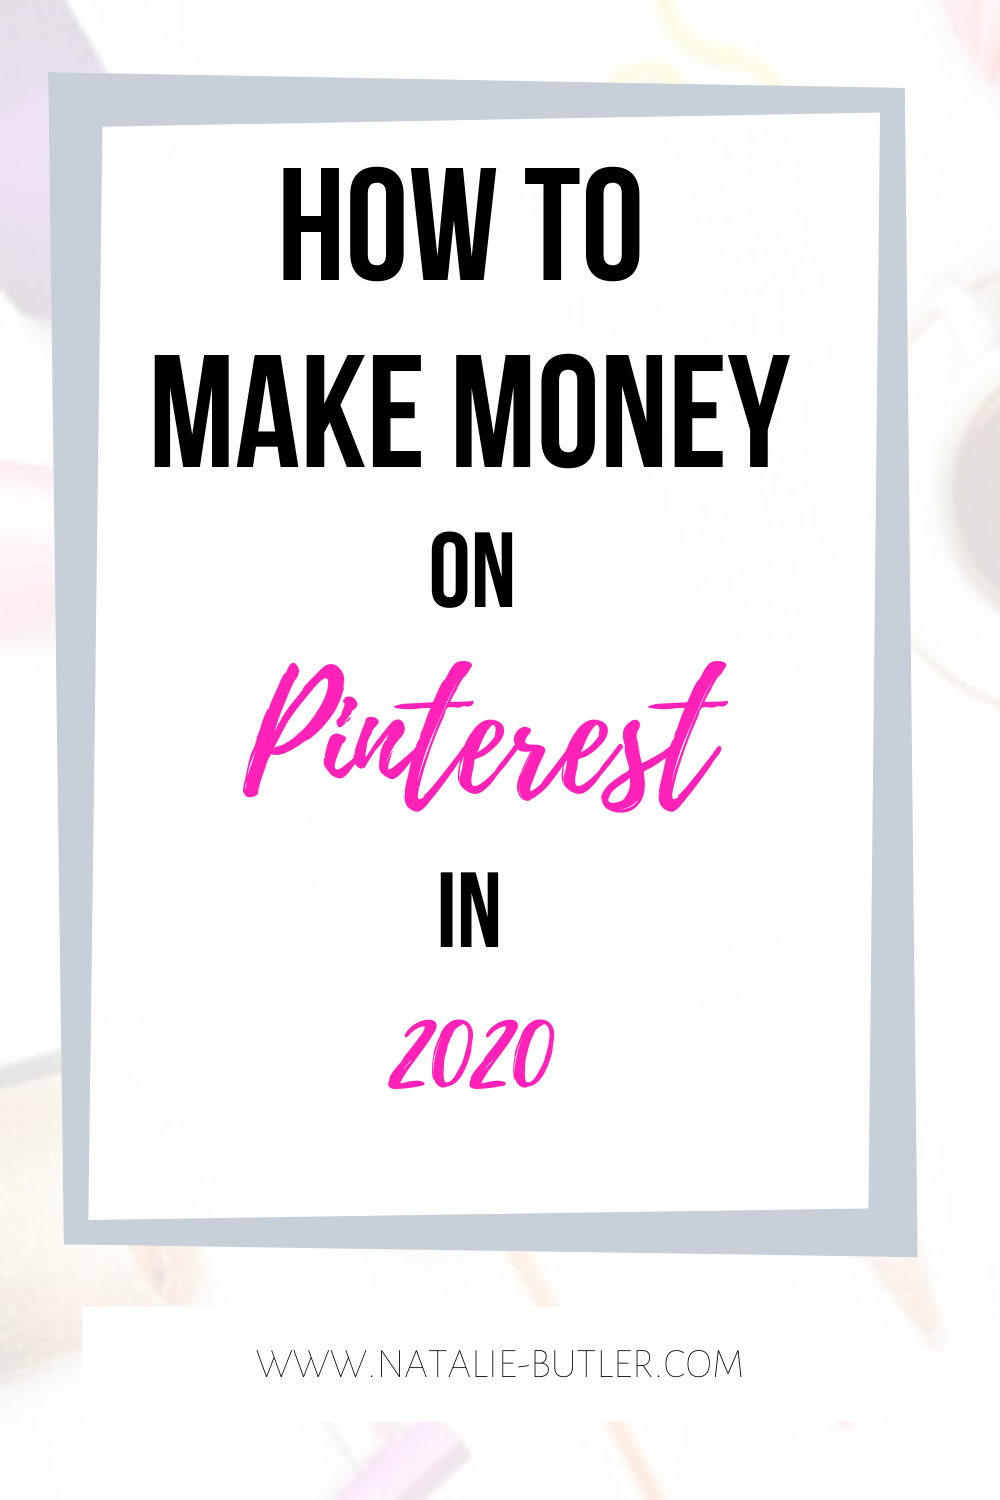 How to Make Money on Pinterest in 2020